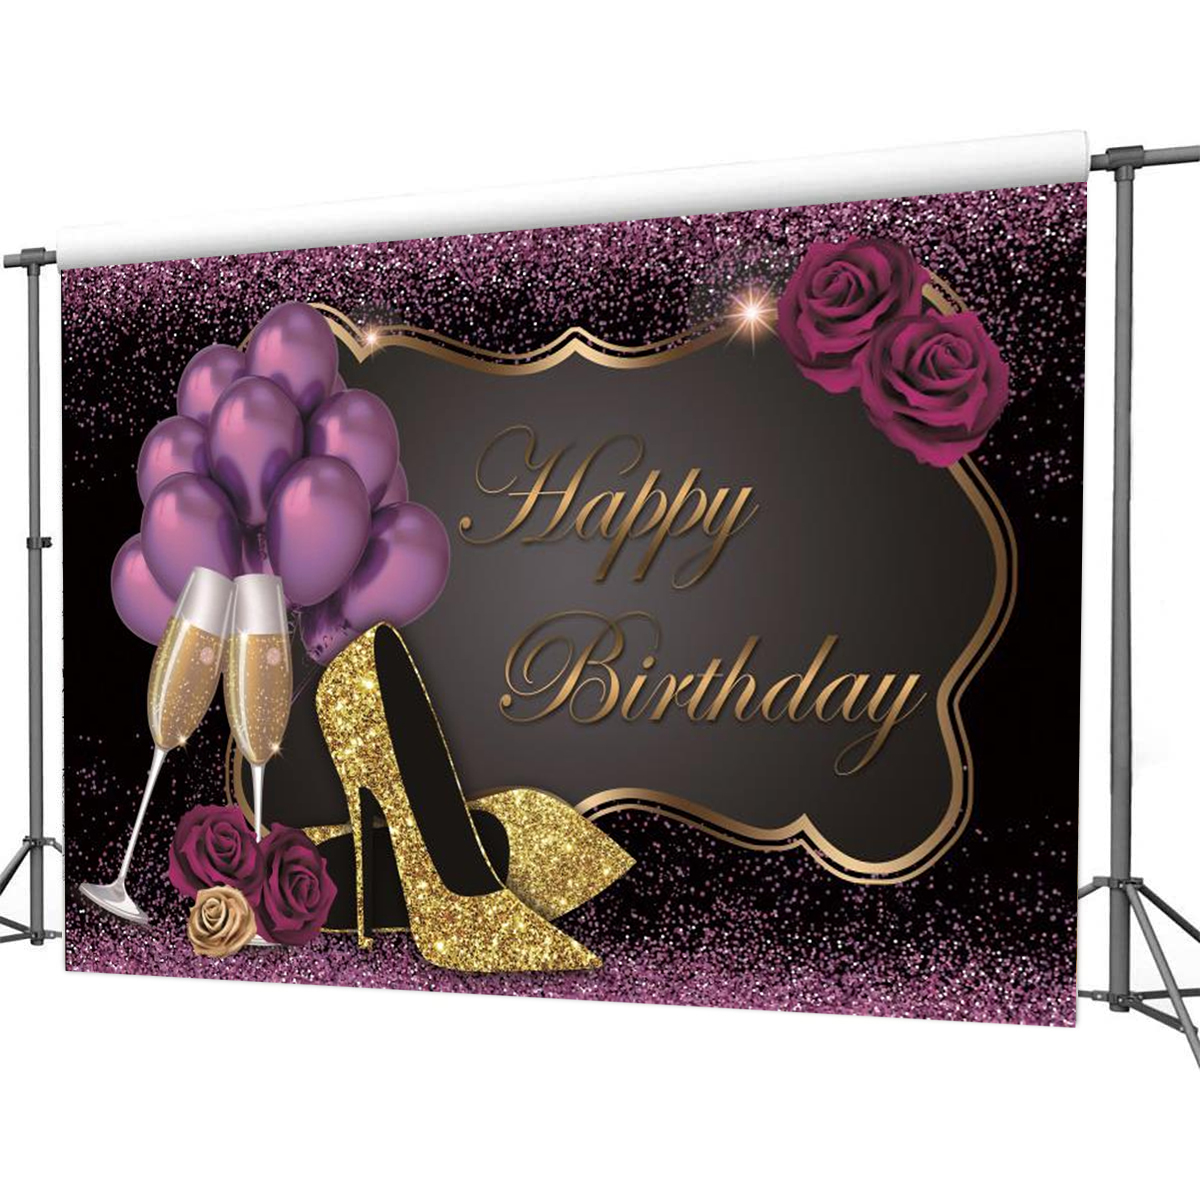 Happy-Birthday-Party-Photo-Photography-Backdrop-Cloth-Studio-Background-Home-Decoration-Props-1821314-9